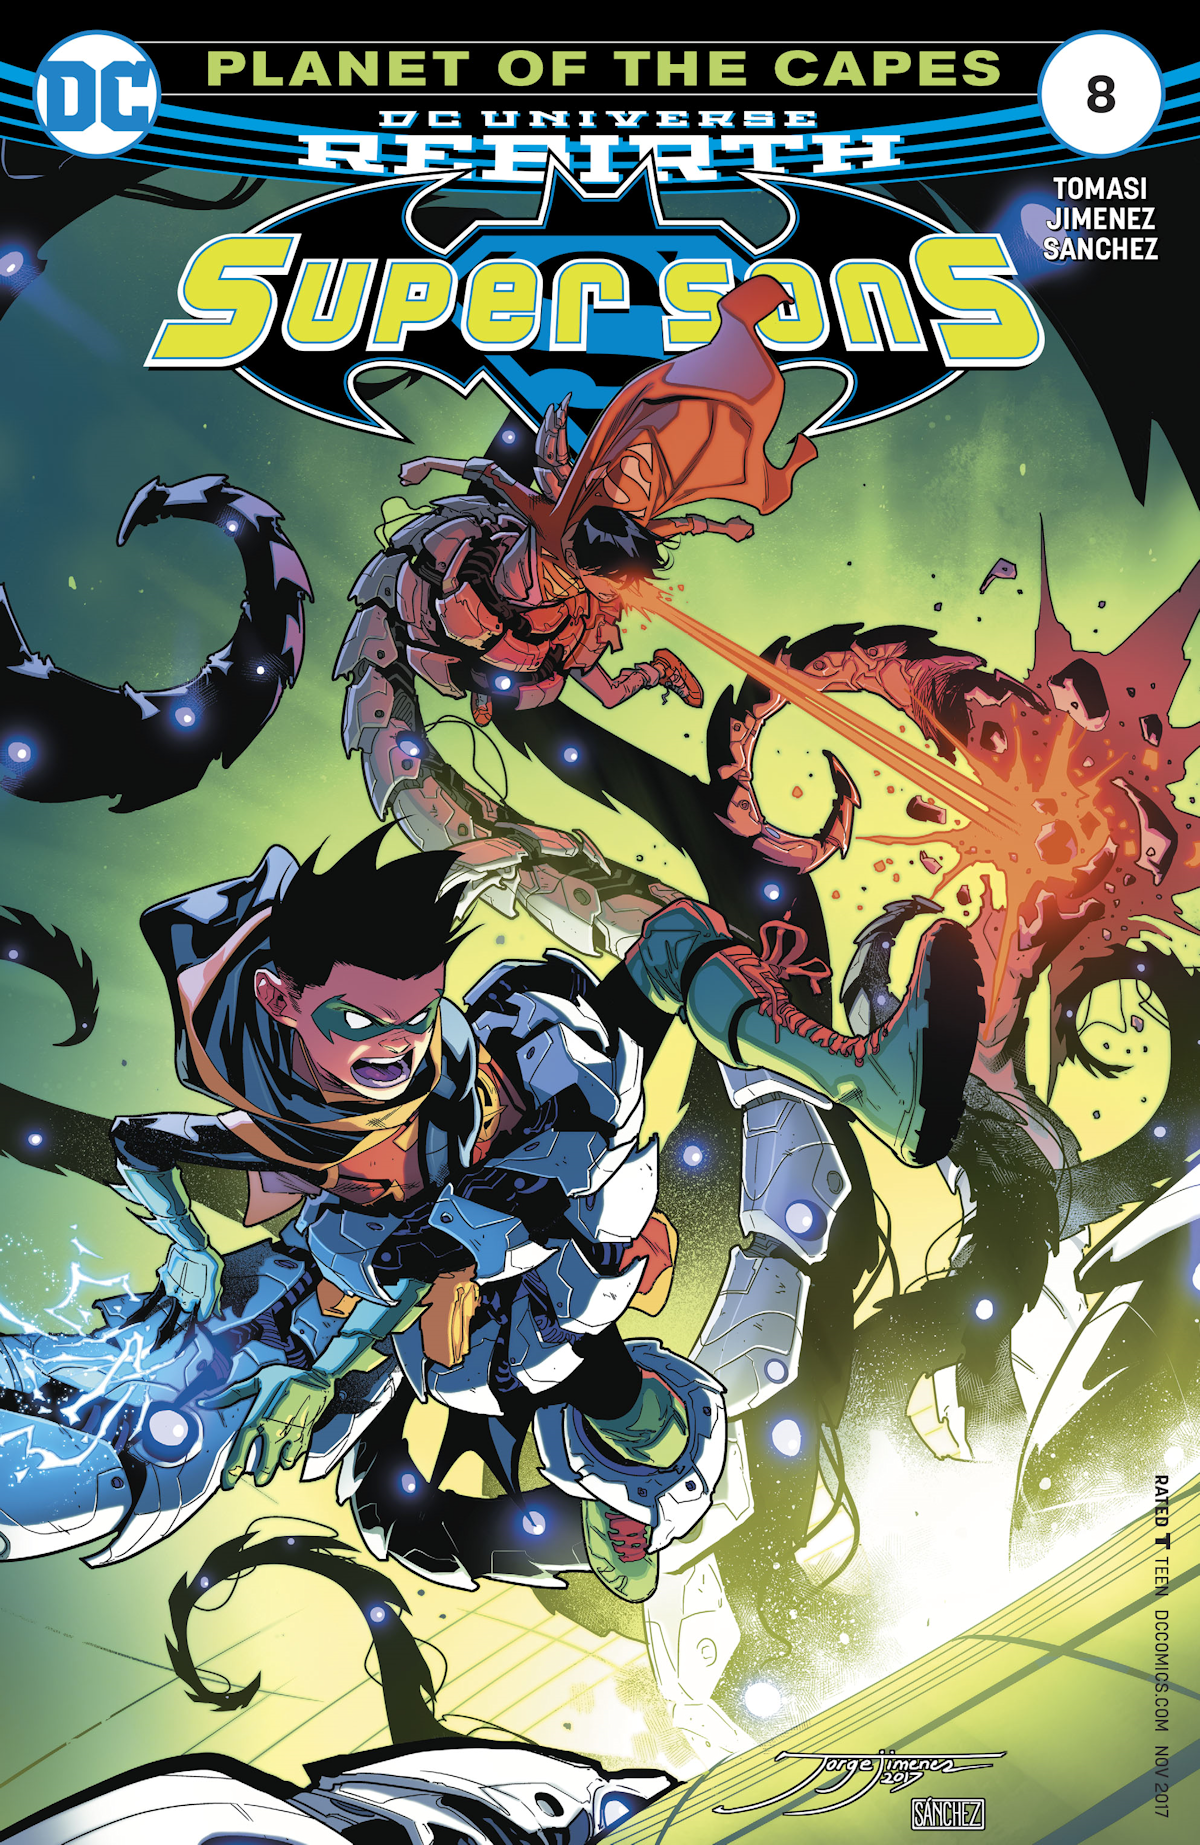 Super Sons 8 (Cover A)